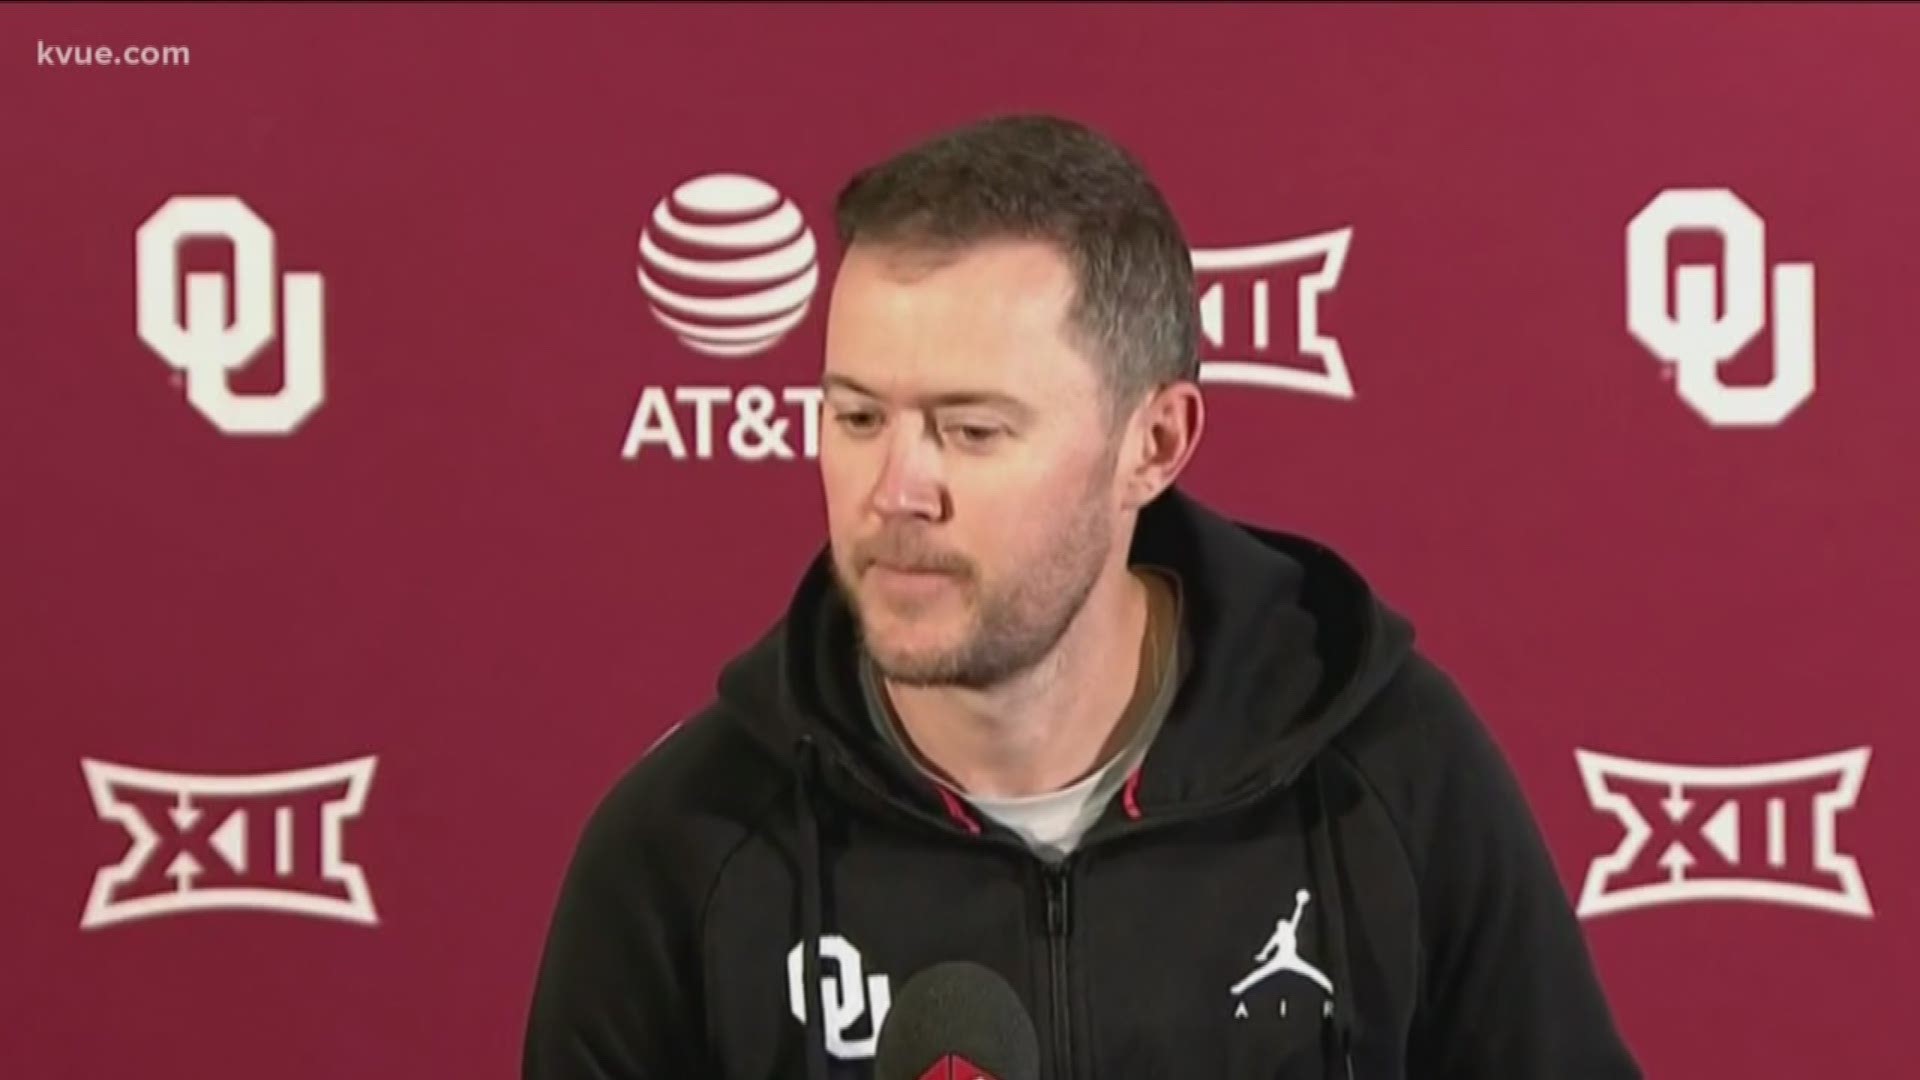 Ahead of the 2019 AT&T Red River Showdown, Oklahoma head coach Lincoln Riley said his players would not be flashing the 'Horns Down' sign in the game.